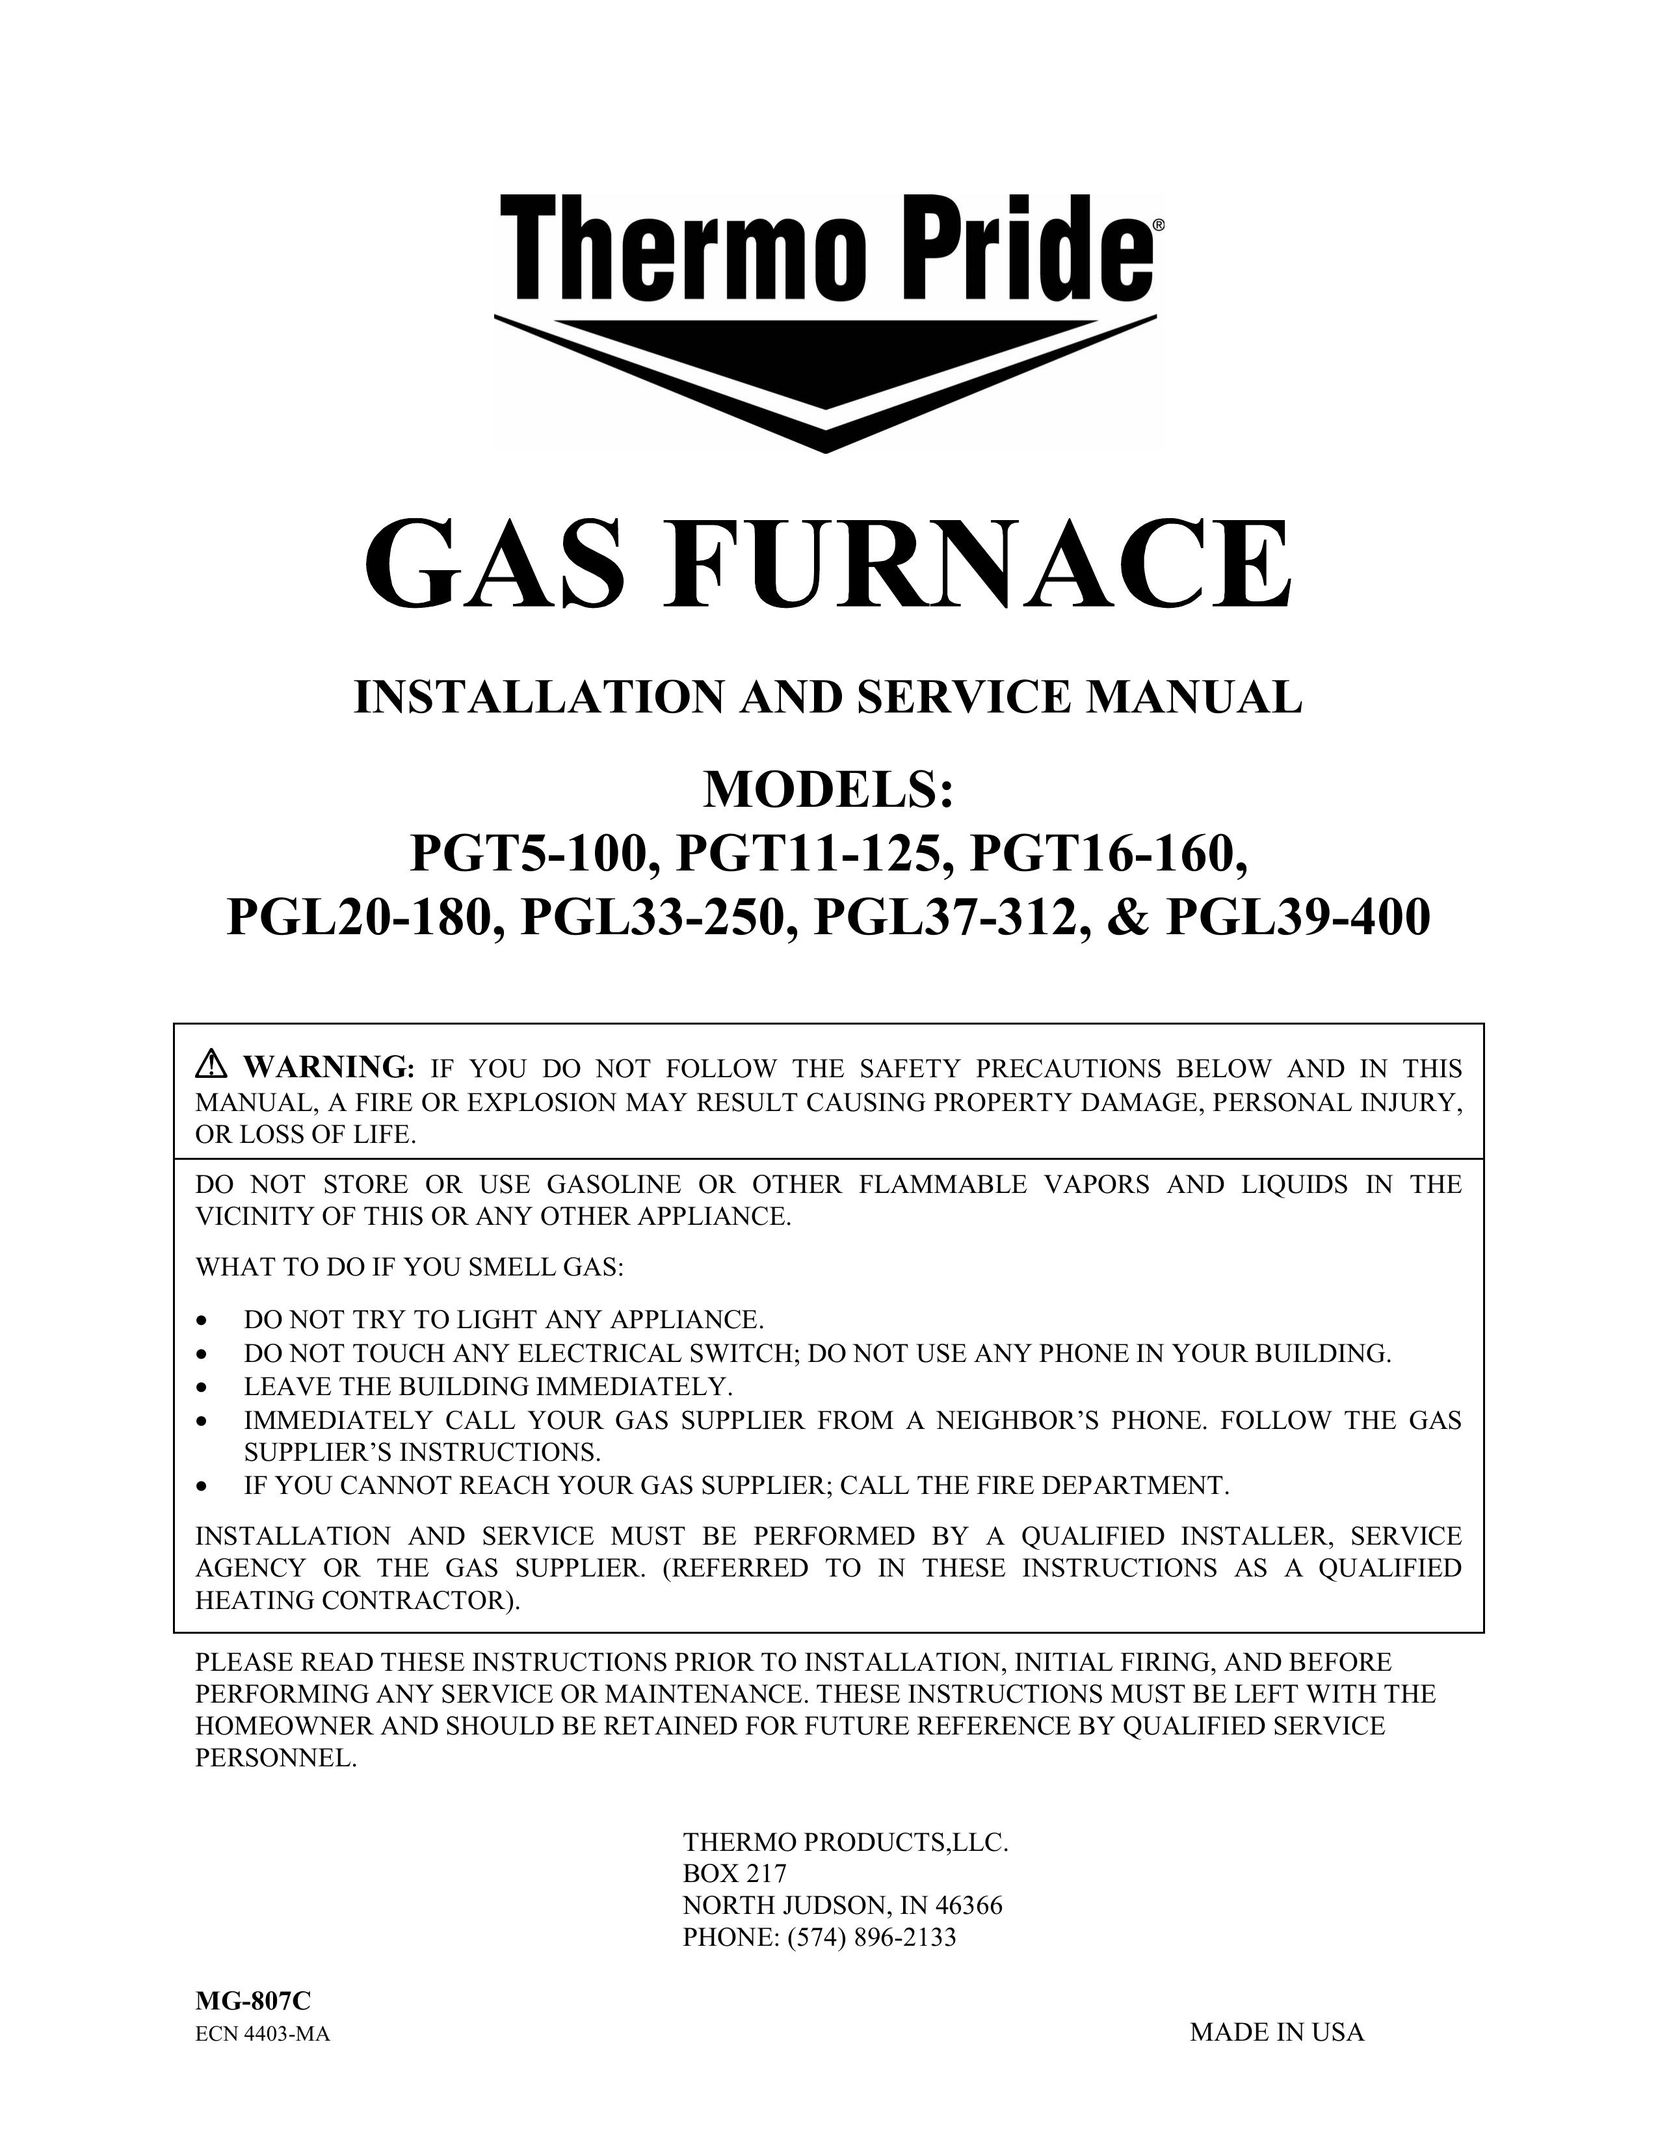 Thermo Products PGL20-180 Burner User Manual